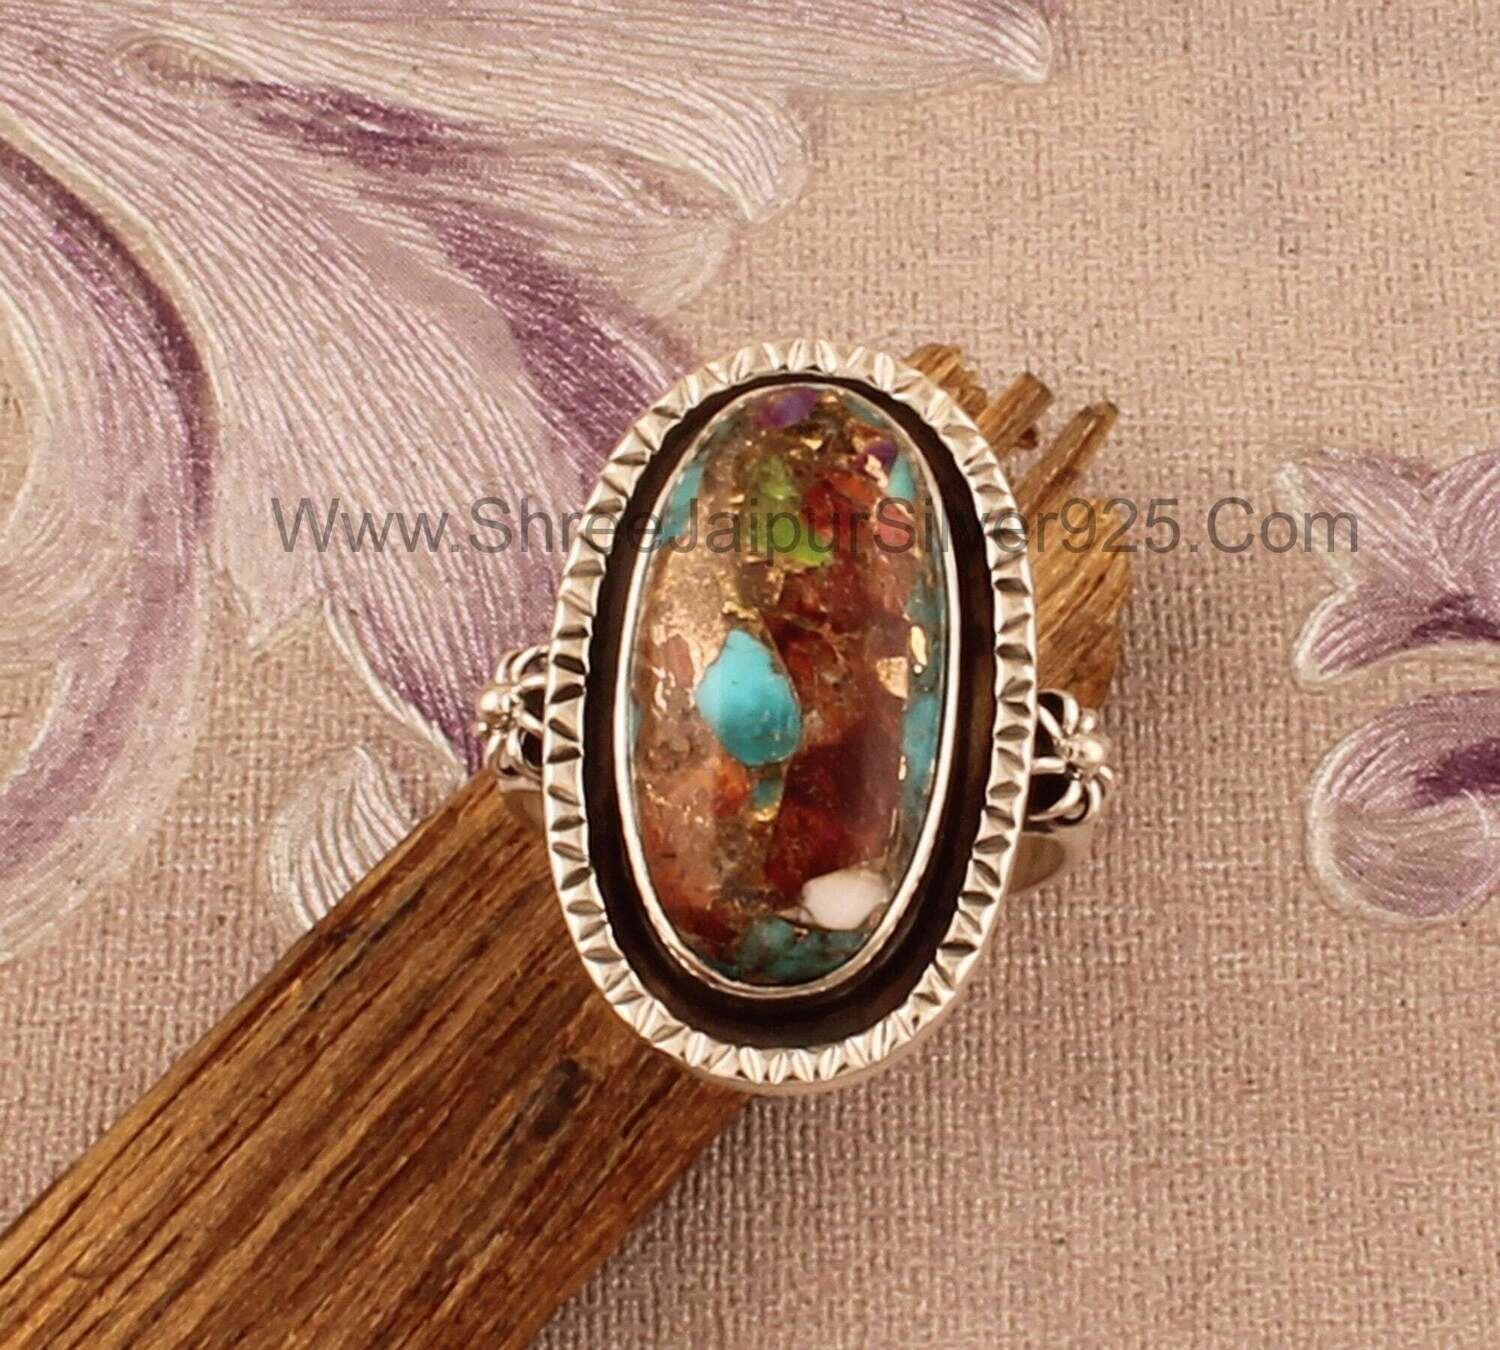 Mix Copper Turquoise Solid 925 Sterling Silver Gemstone Ring For Women, Handmade Oxidized Oval Stone Ring For Wedding Anniversary Gift Idea